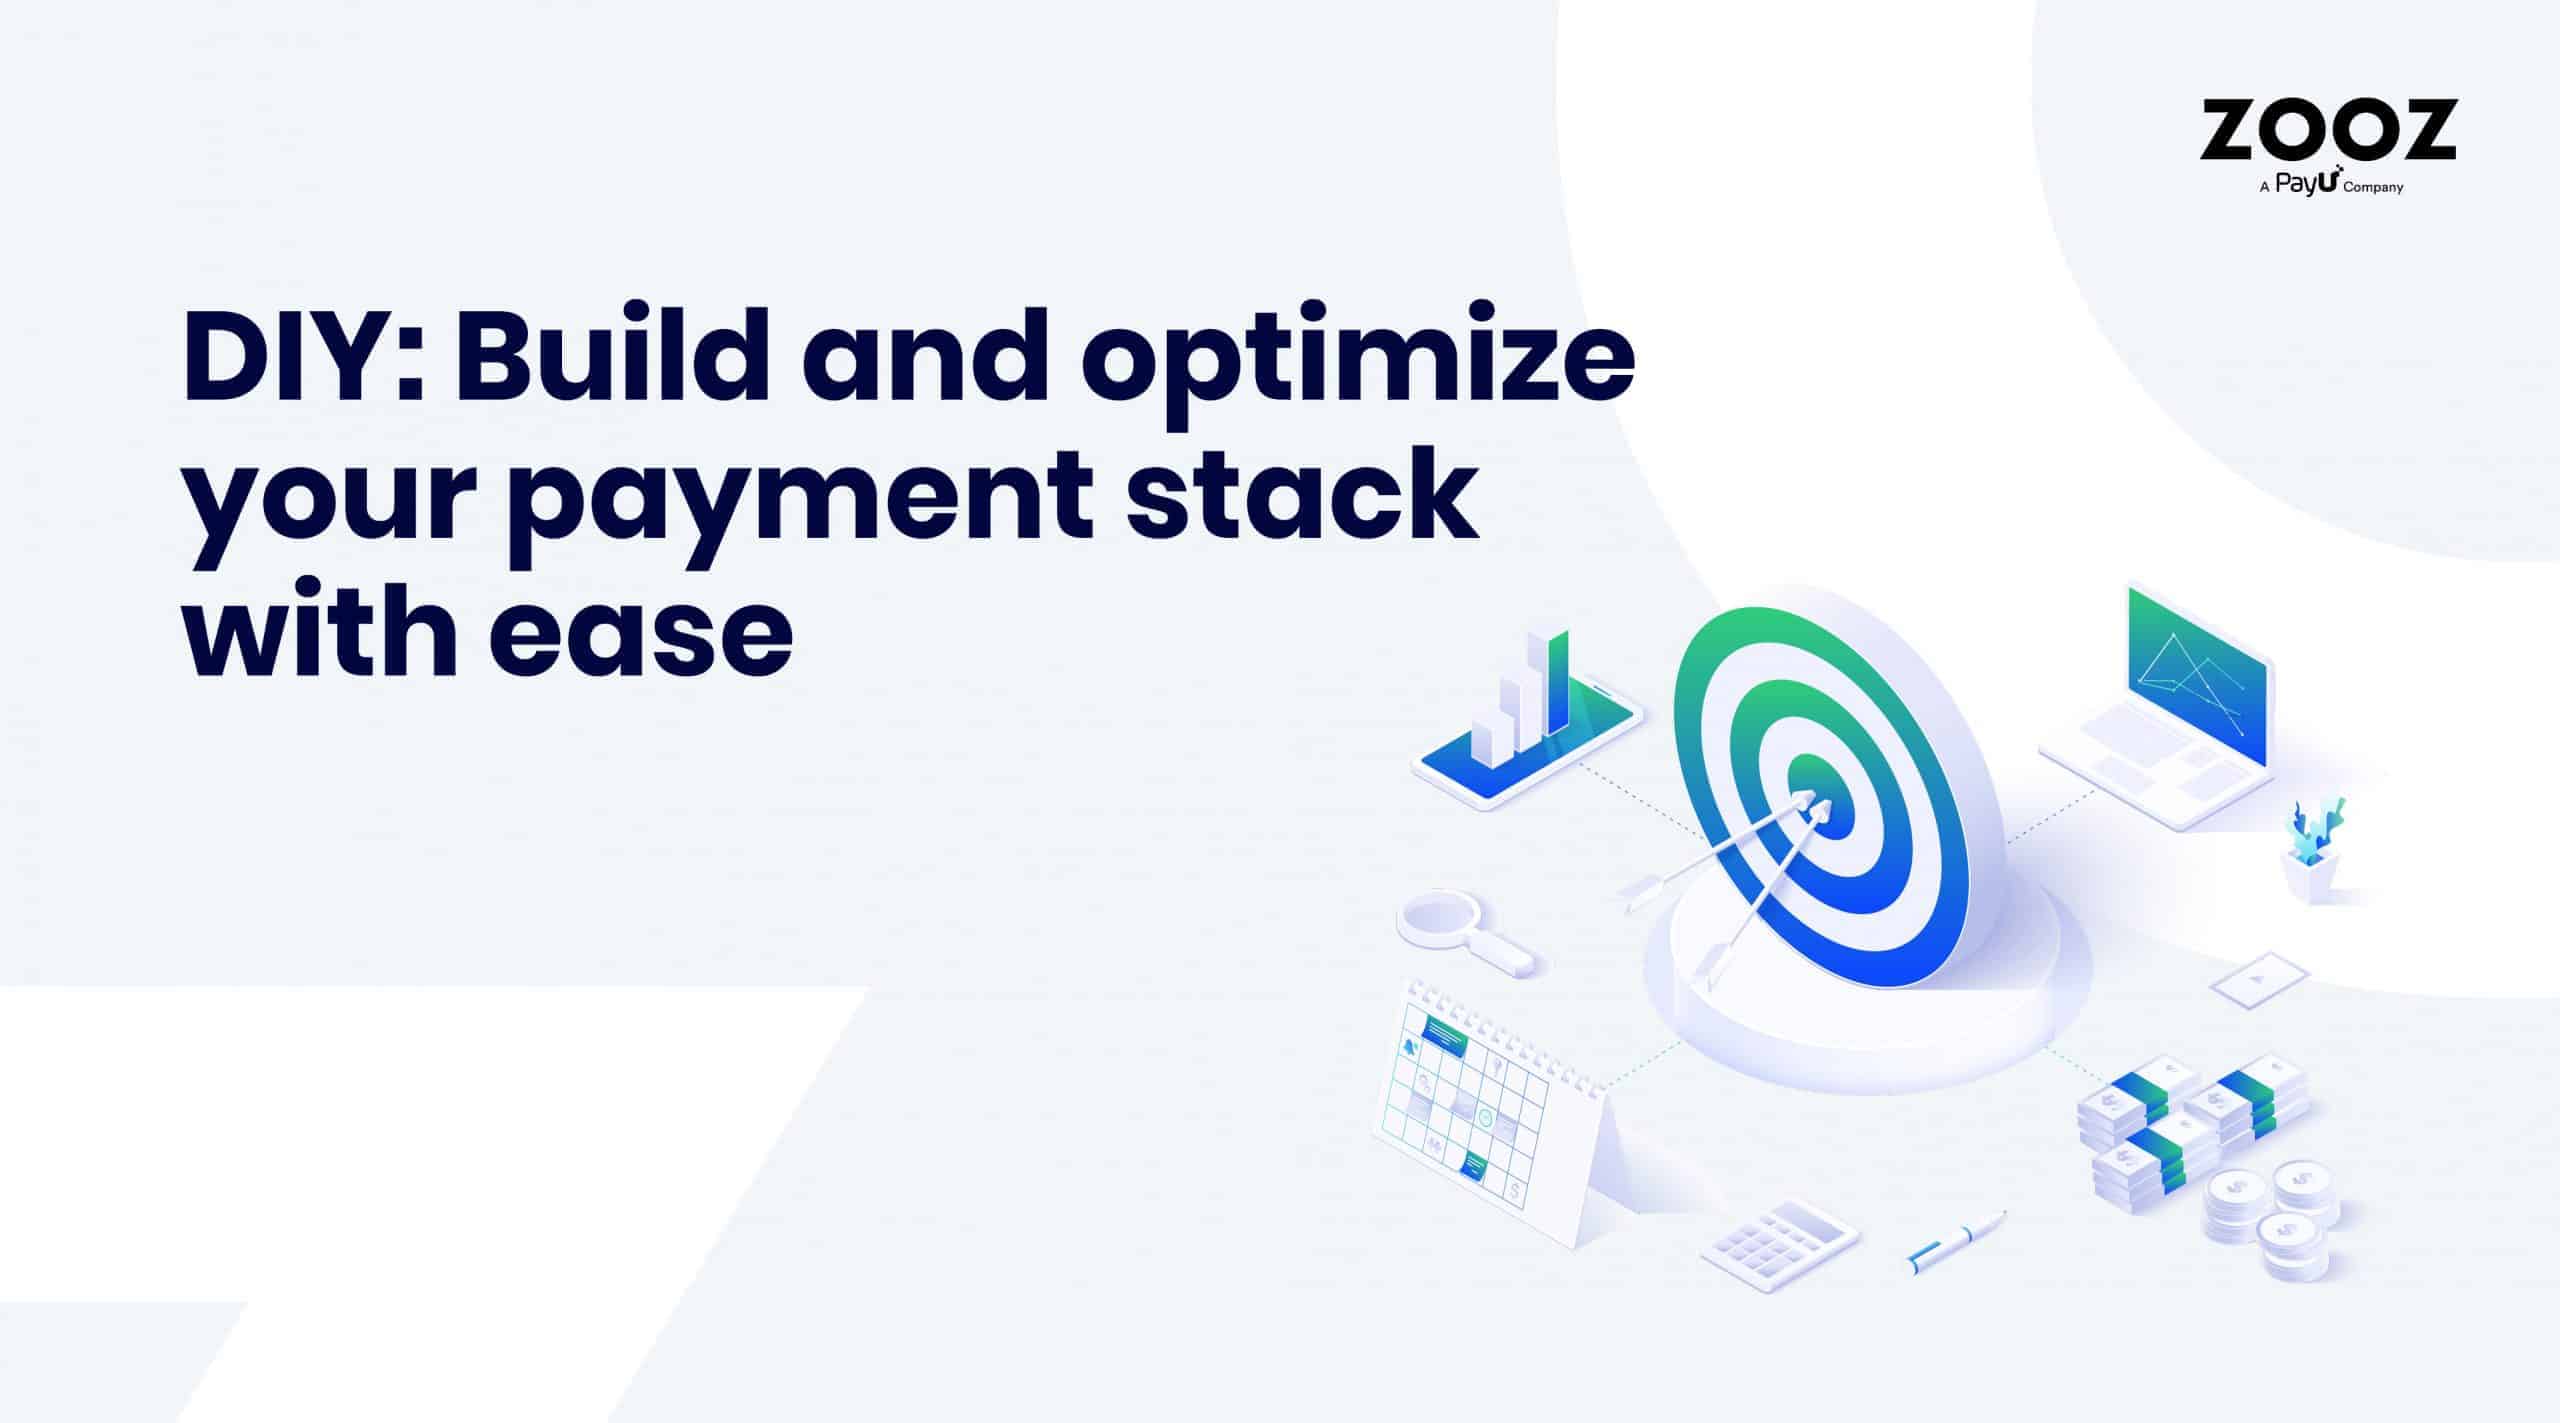 Build and optimize your payment stack with ease